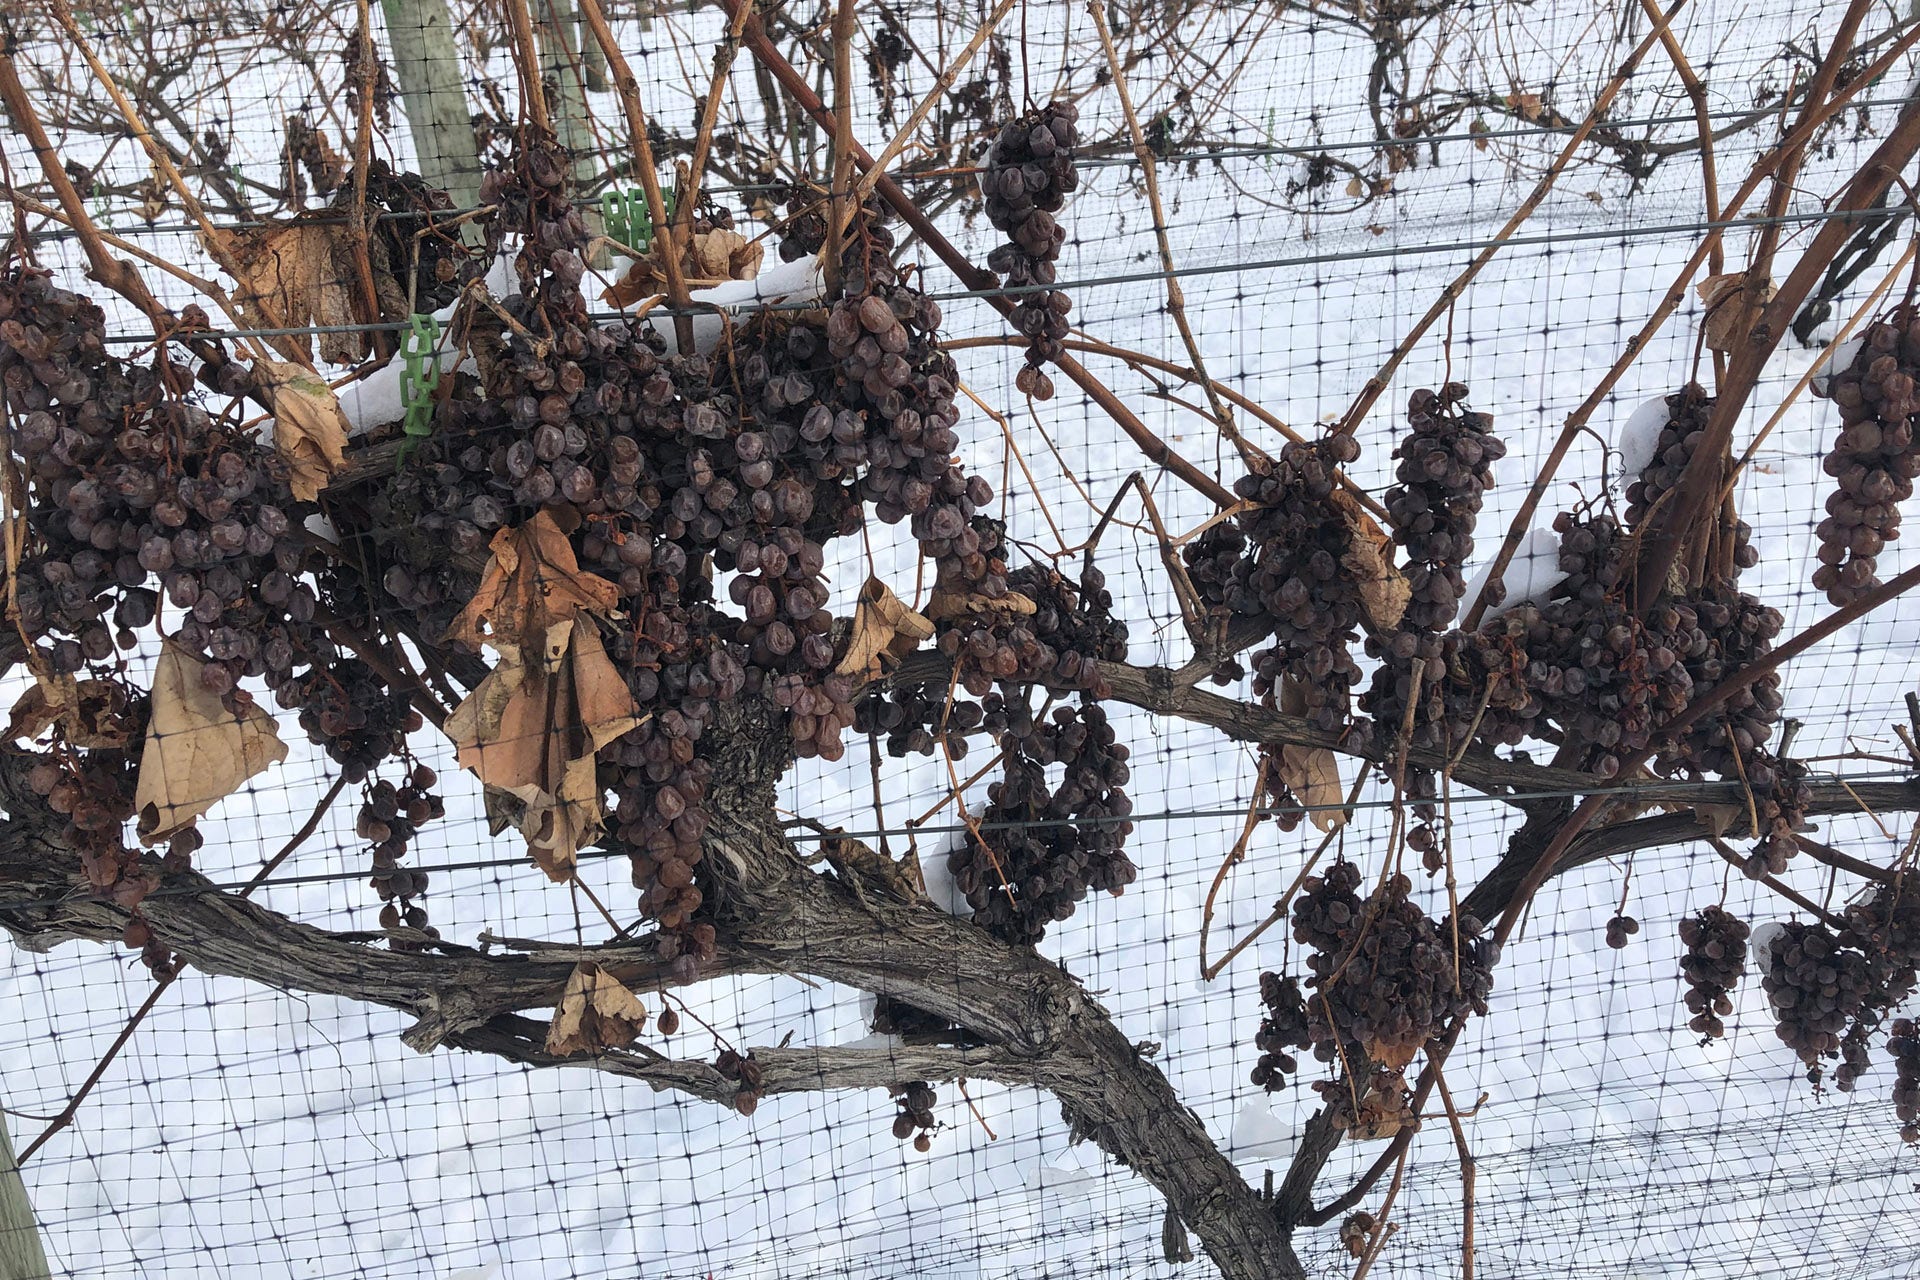 Frozen vines at Next Chapter Winery in New Prague, Minnesota / Photo by Timothy Tulloch